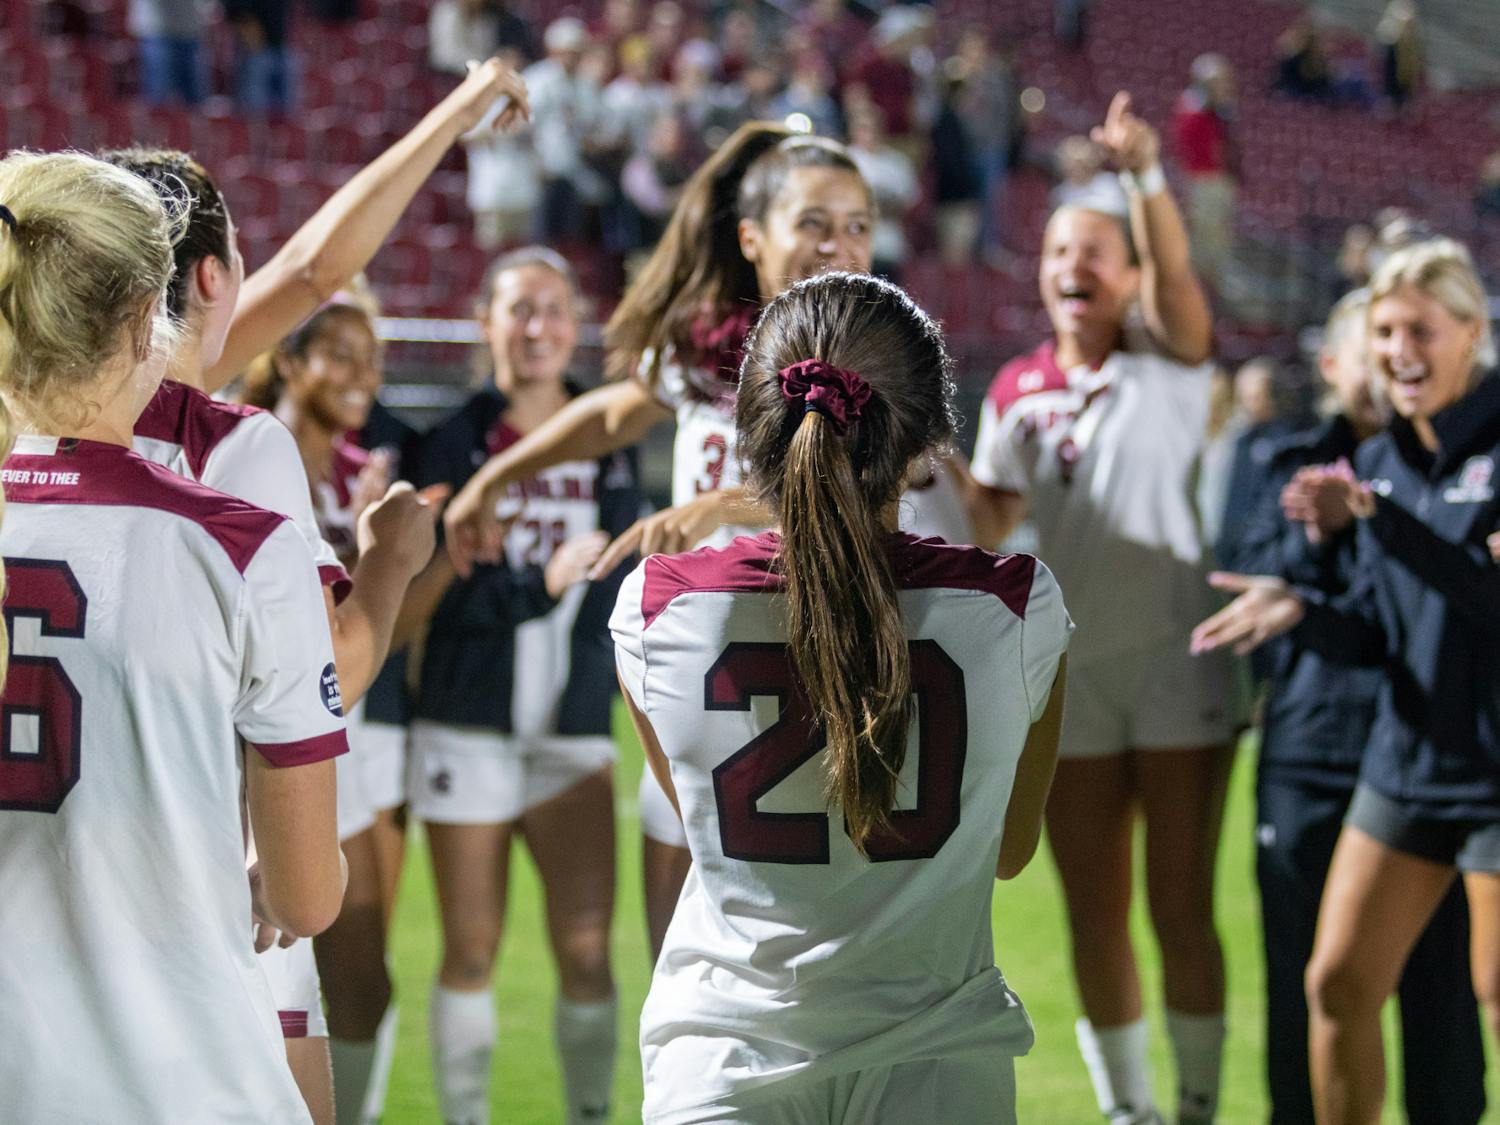 FILE— Senior defender Camryn Dixon and junior forward Corinna Zullo celebrate with their team after the win against Missouri on Oct. 27, 2022. After Thursday’s result on Nov. 3, 2022 there will be a title matchup between No. 1 seed Alabama and No. 2 seed South Carolina, regular season winners of the SEC West and East respectively.&nbsp;